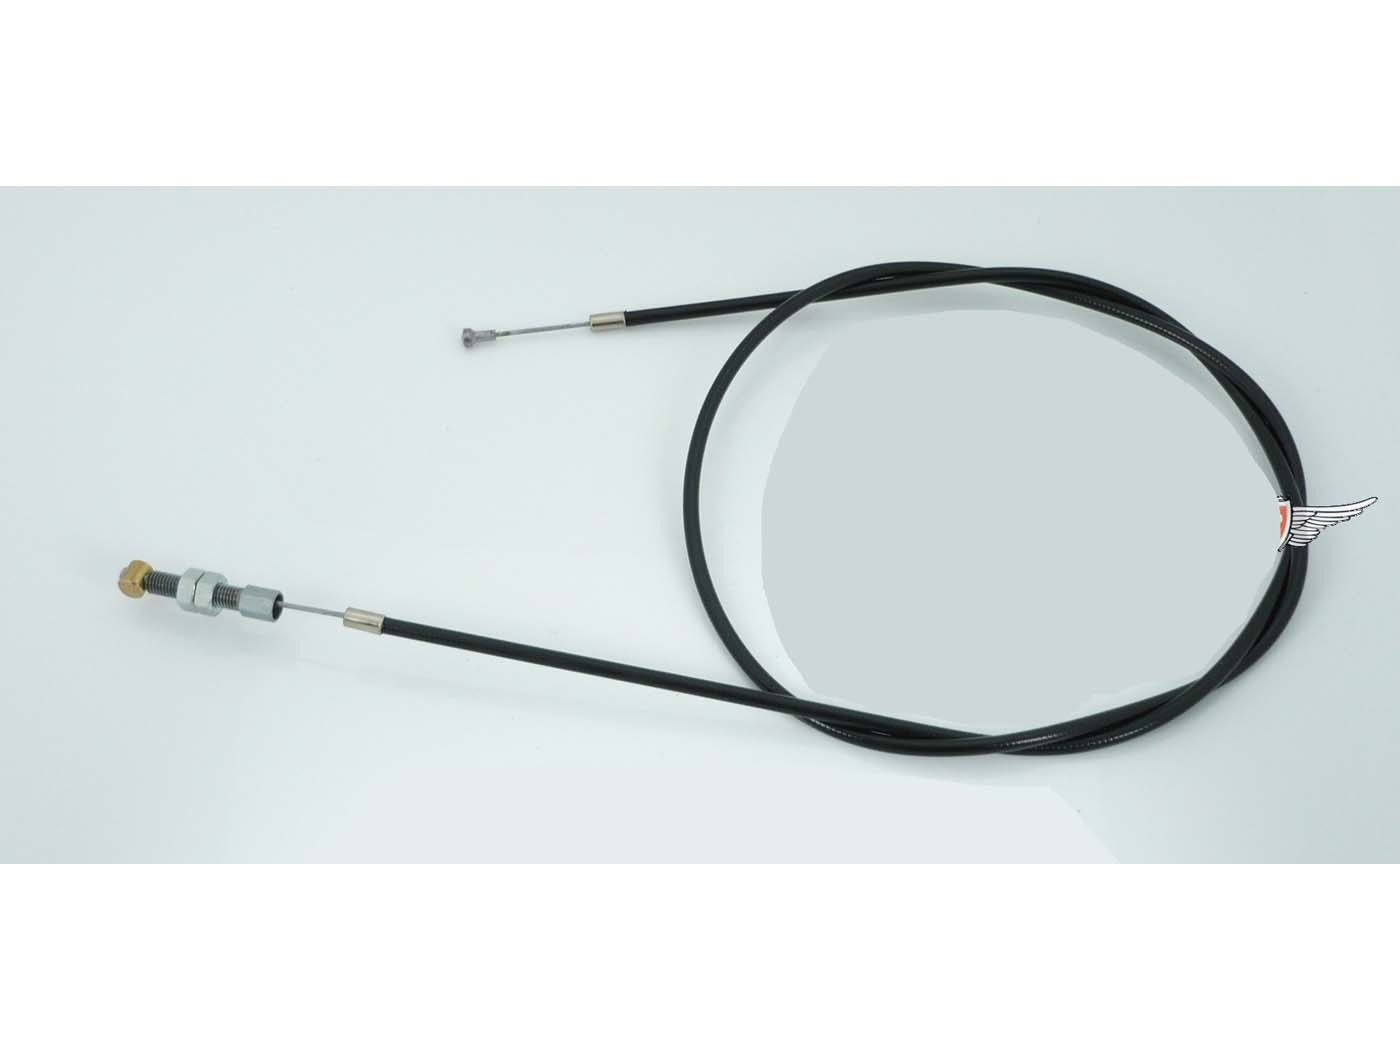 Brake Cable For Puch DS 50 L Scooter Mokick